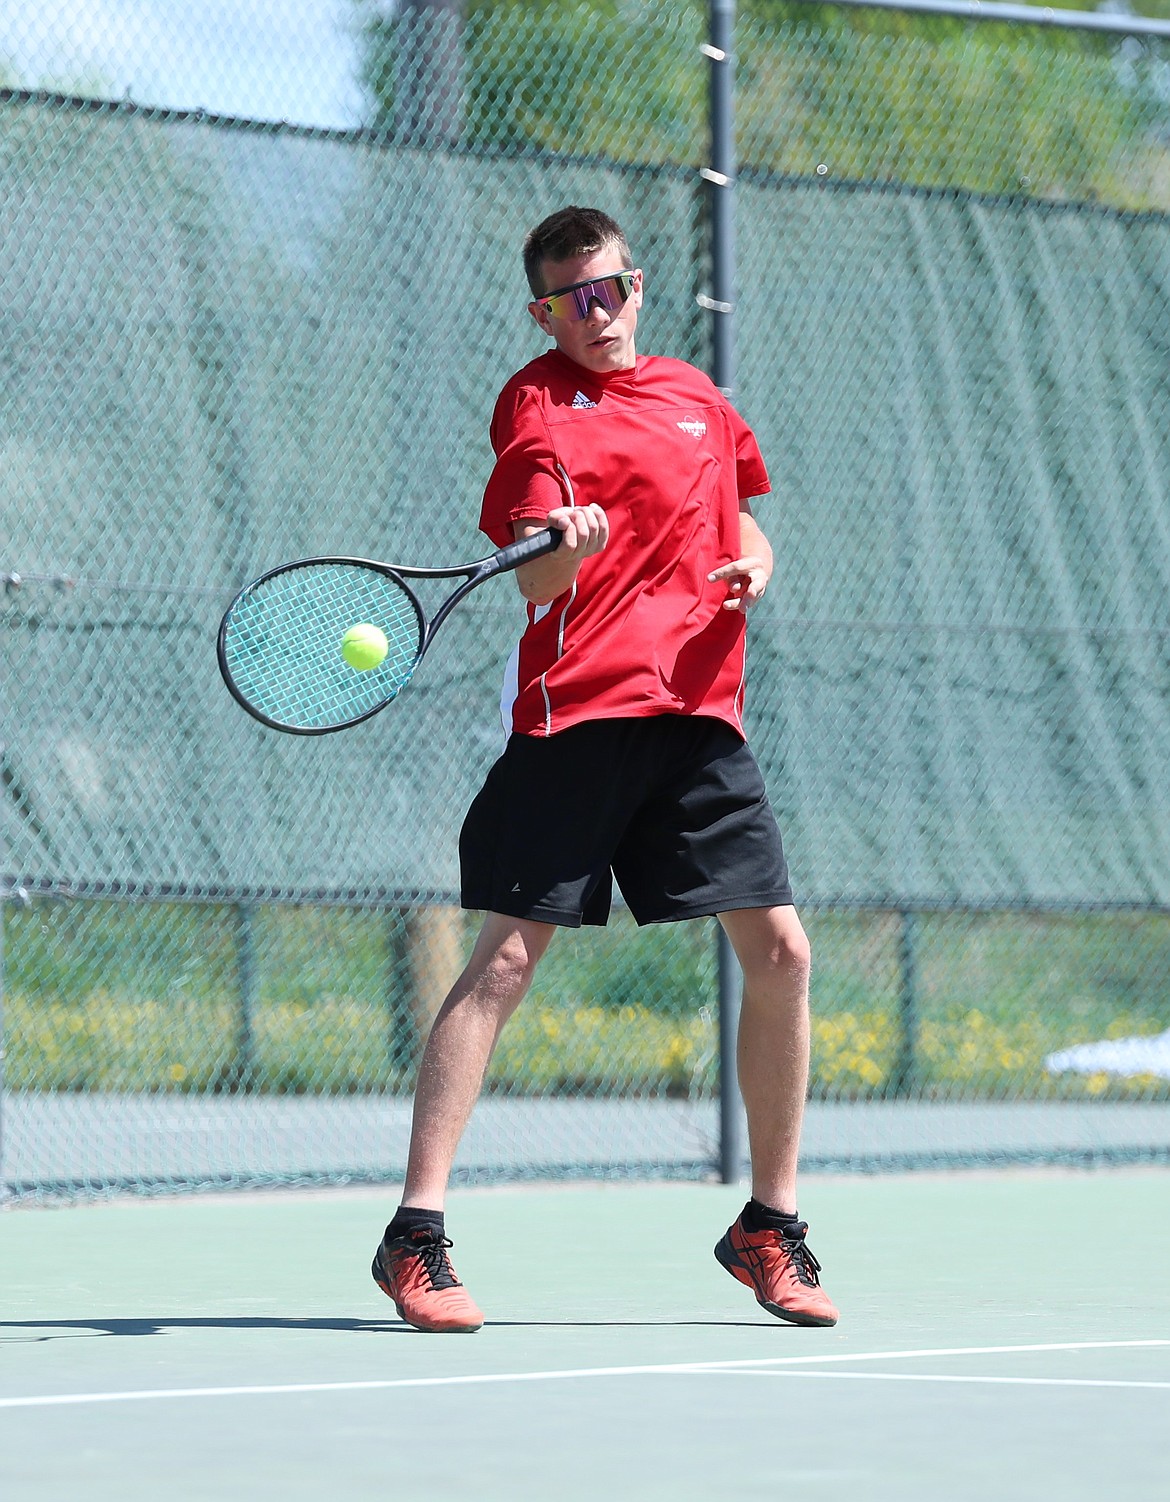 Tyler Korn hits a return during the boys doubles regional championship match on Saturday at Travers Park.